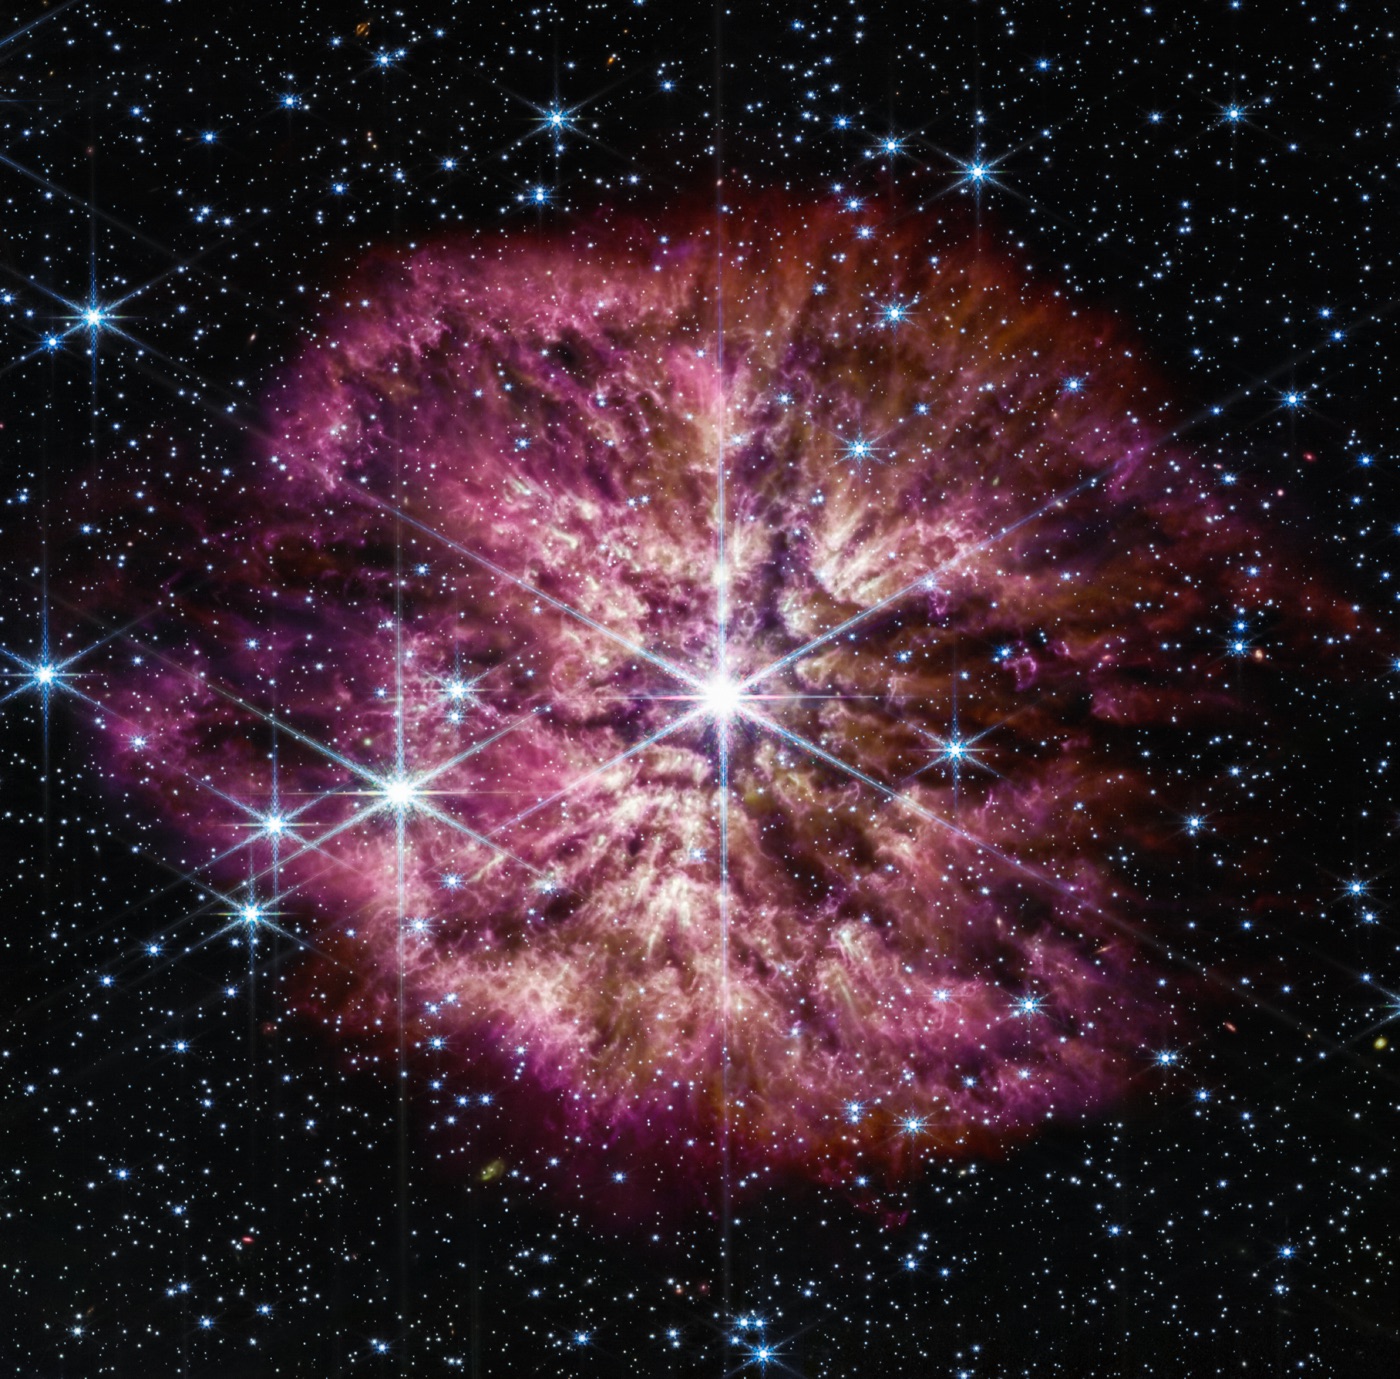 The luminous, hot star Wolf-Rayet 124 (WR 124) is prominent at the center of the James Webb Space Telescope's composite image combining near-infrared and mid-infrared wavelengths of light from Webb's Near-Infrared Camera and Mid-Infrared Instrument